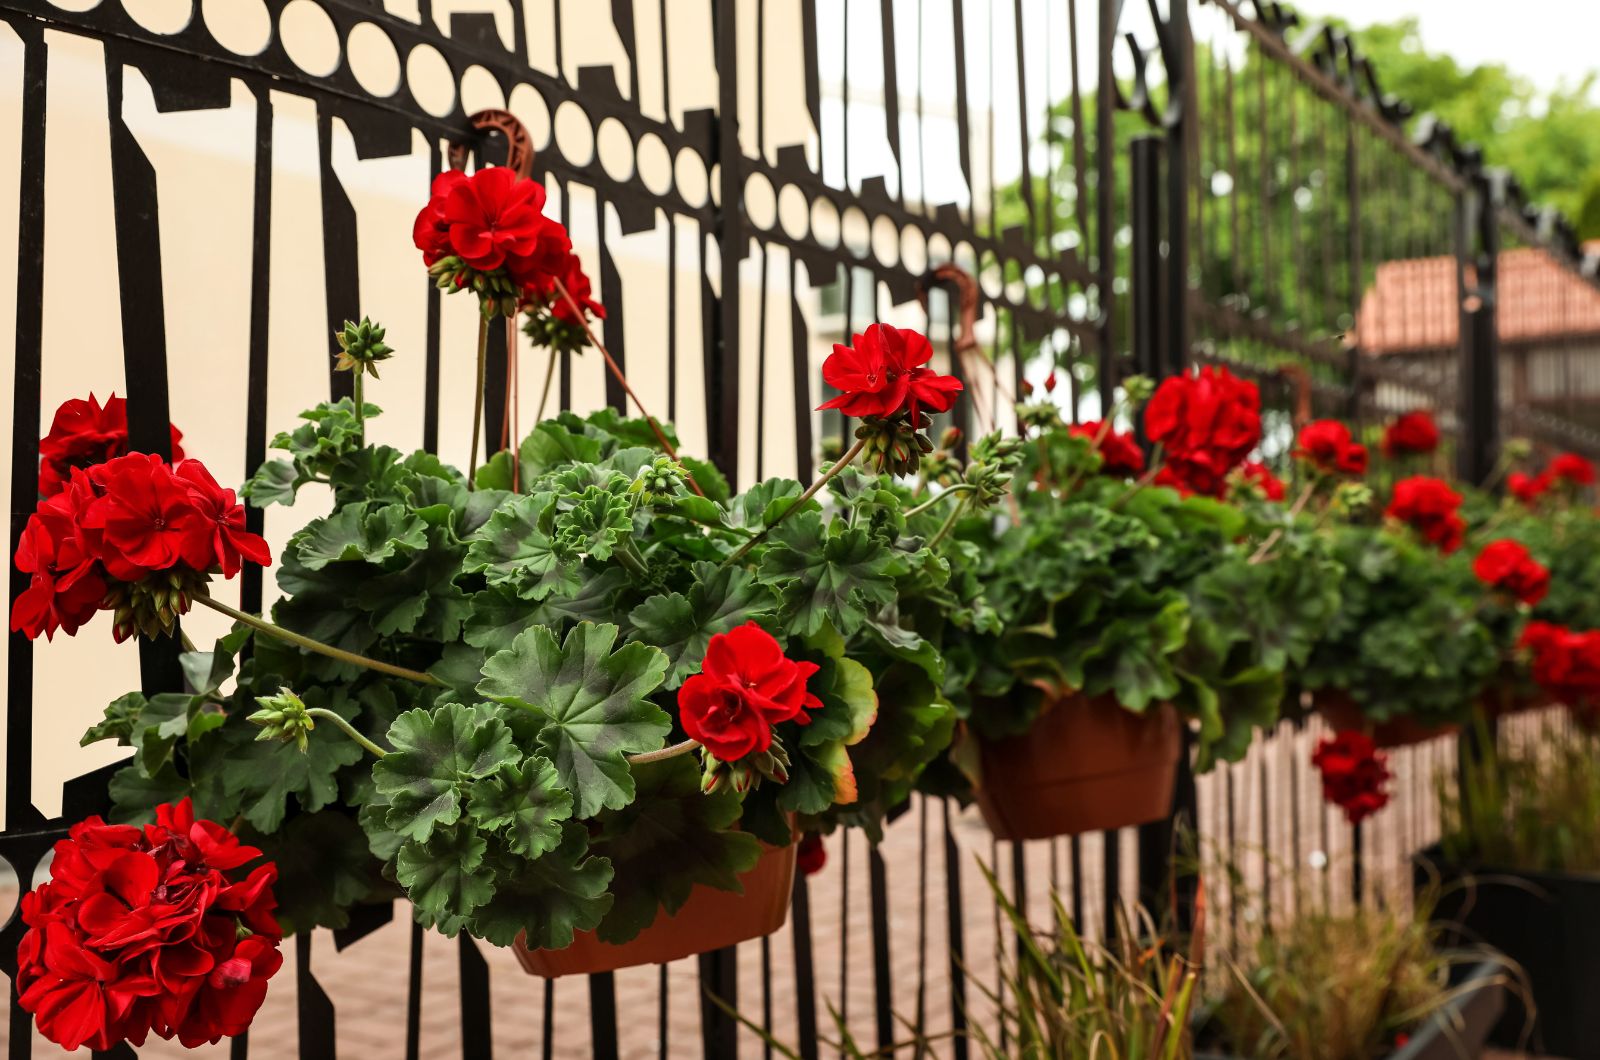 Red Geranium growing outside